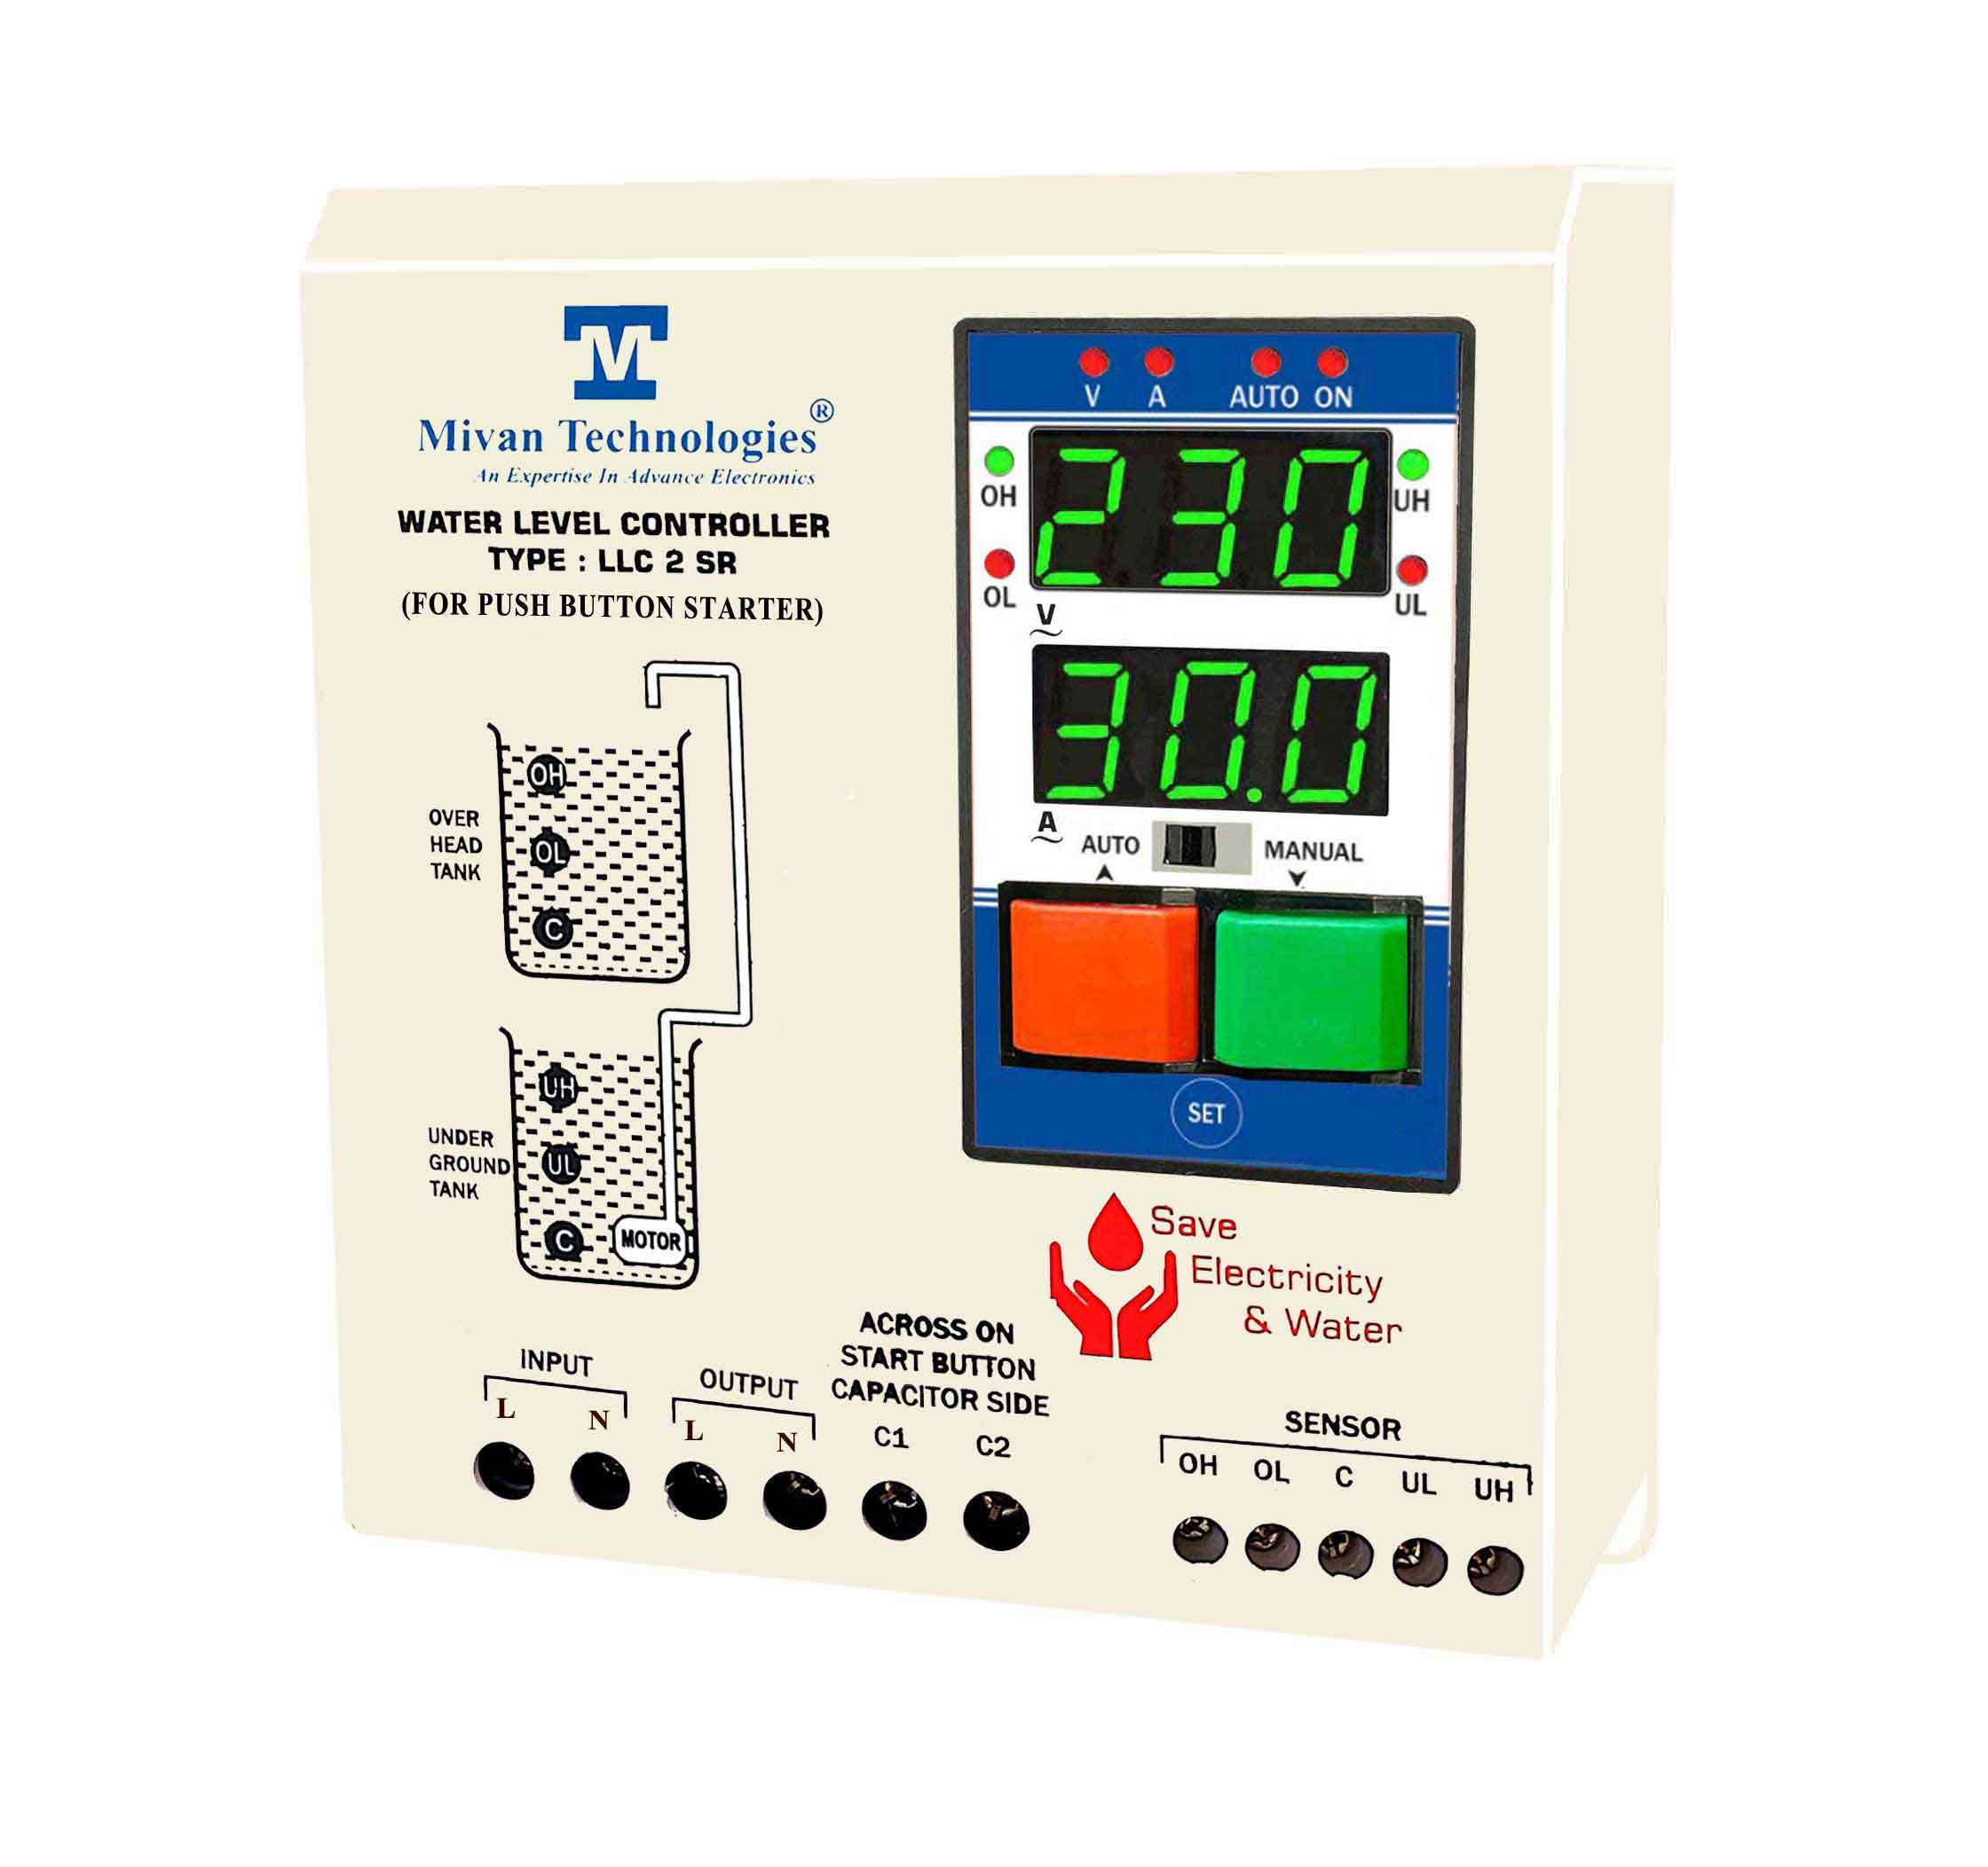 DSL 2SR  Digital water level controller for push button starter panel with V A meter with HV LV OL DRY PROTECTIONS CYC timer